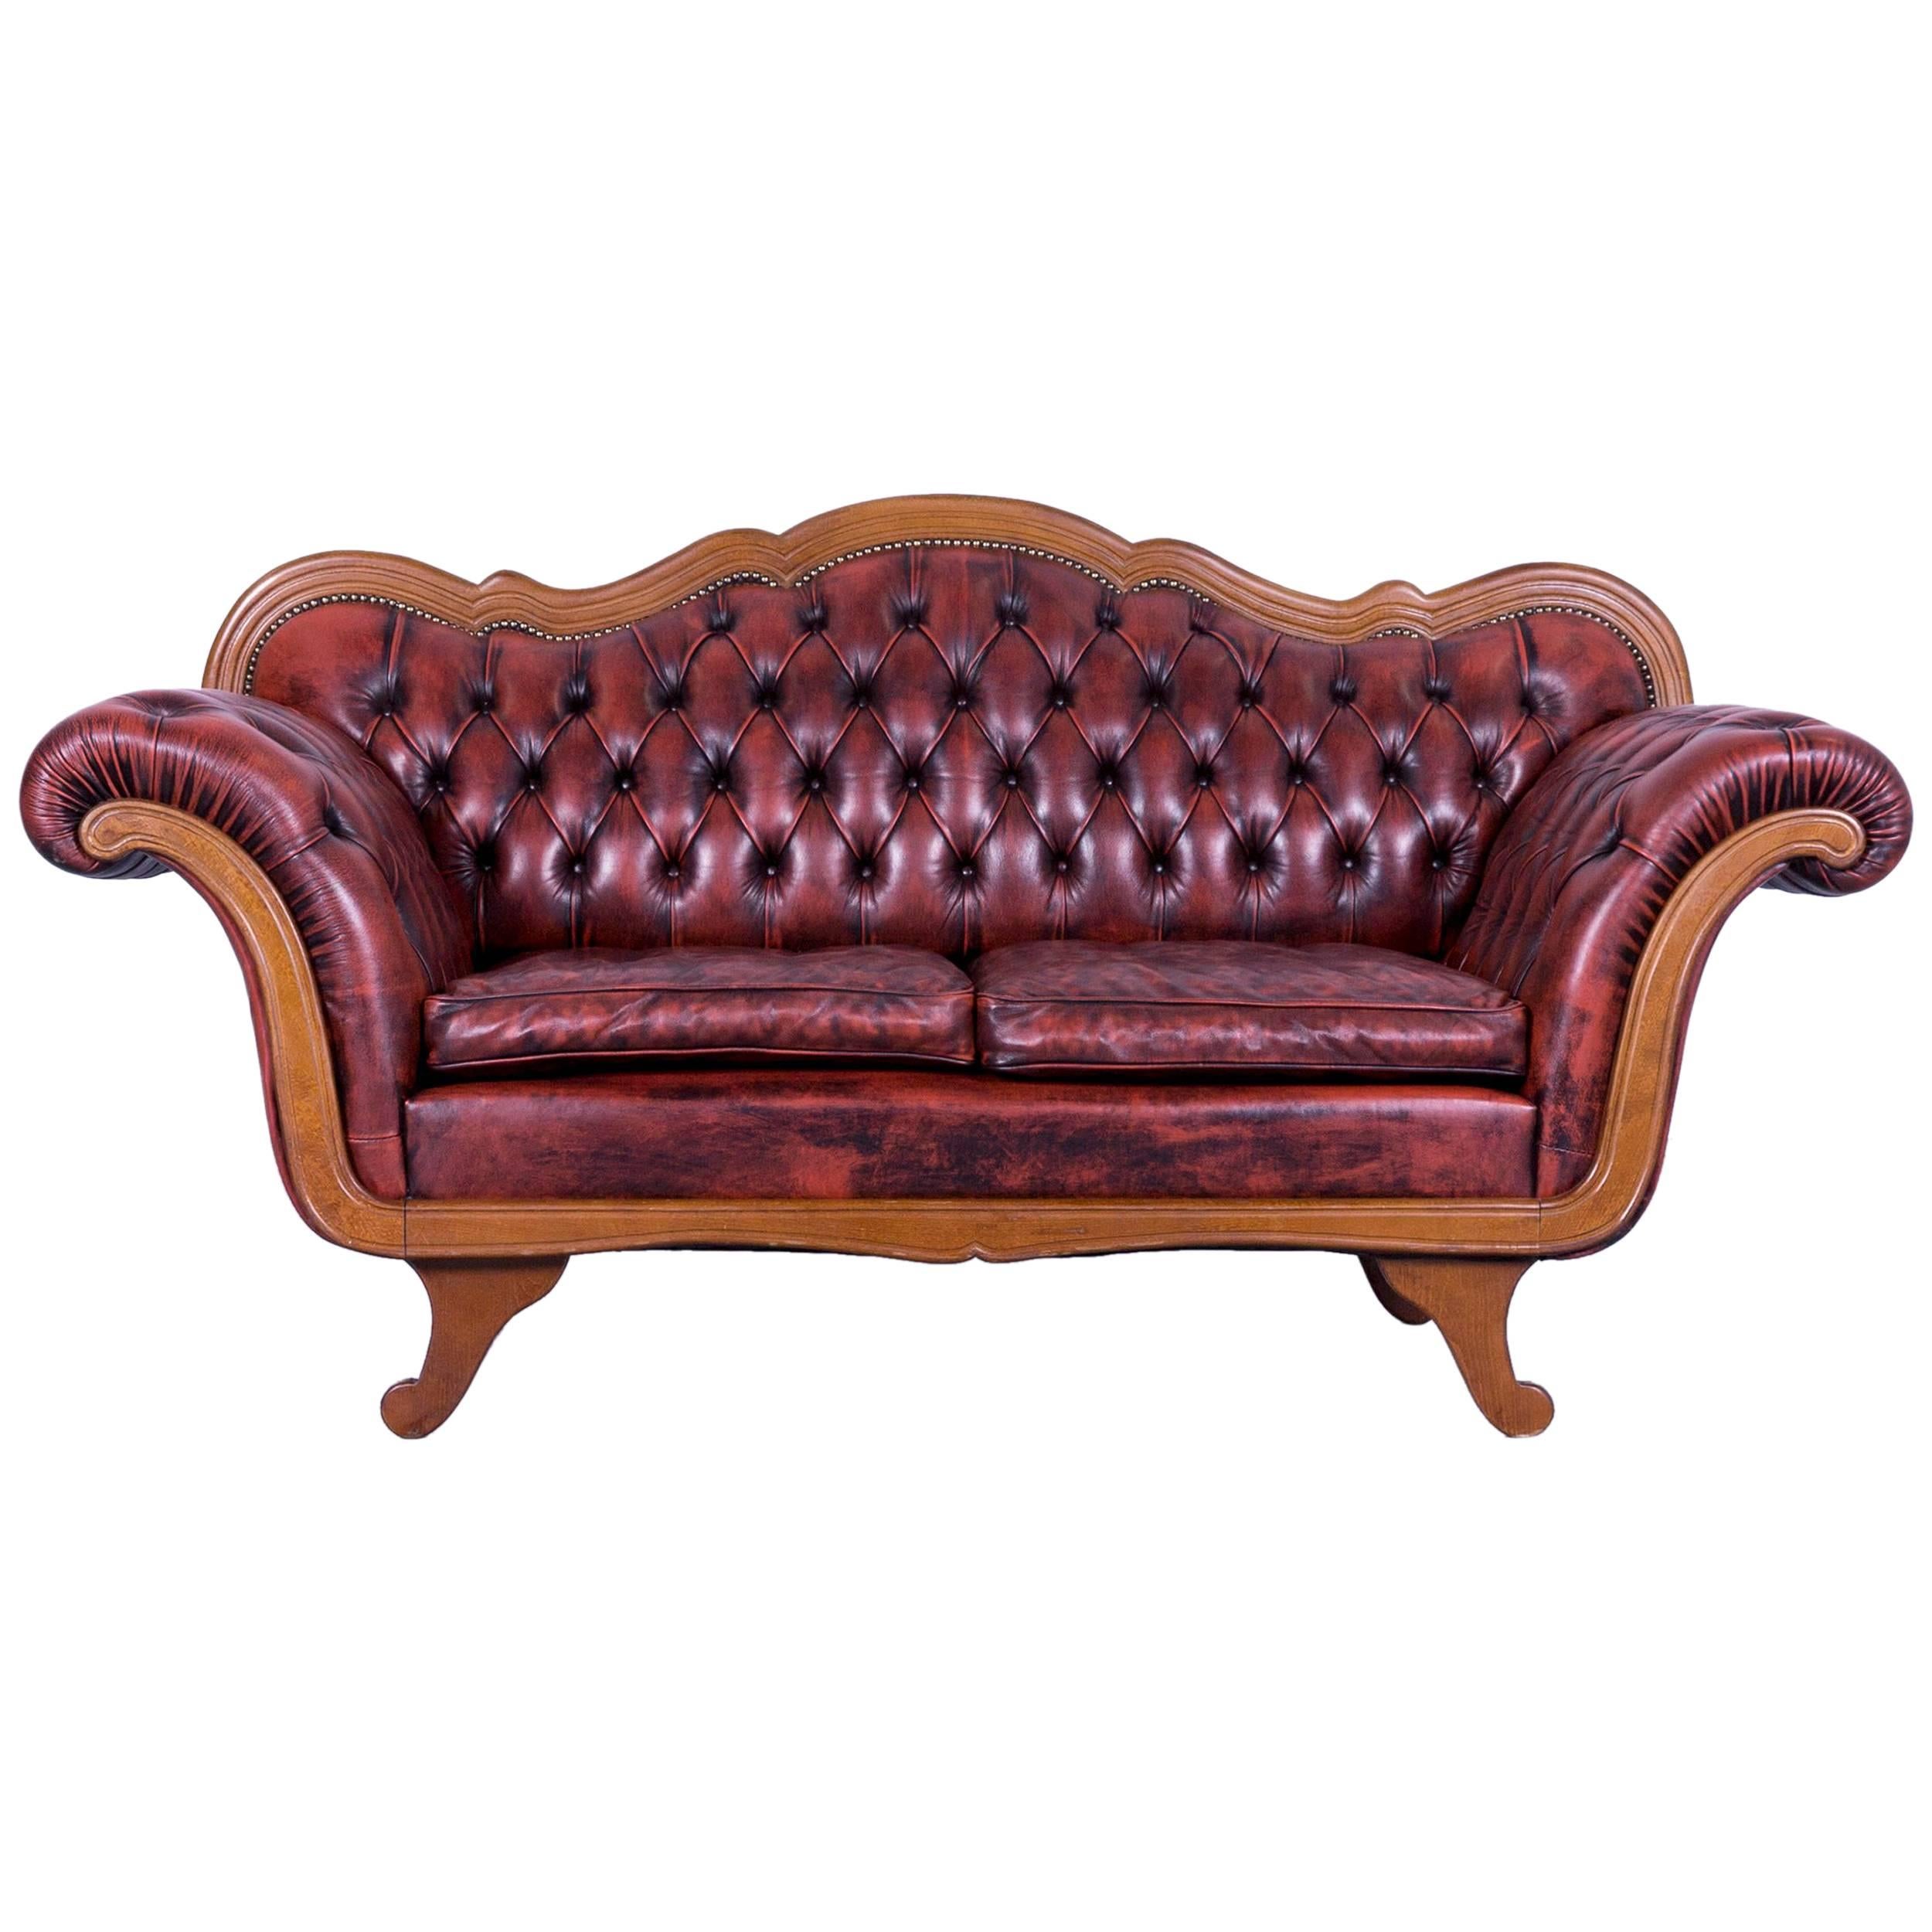 Chesterfield Leather Sofa Red Brown Three-Seat Couch Vintage